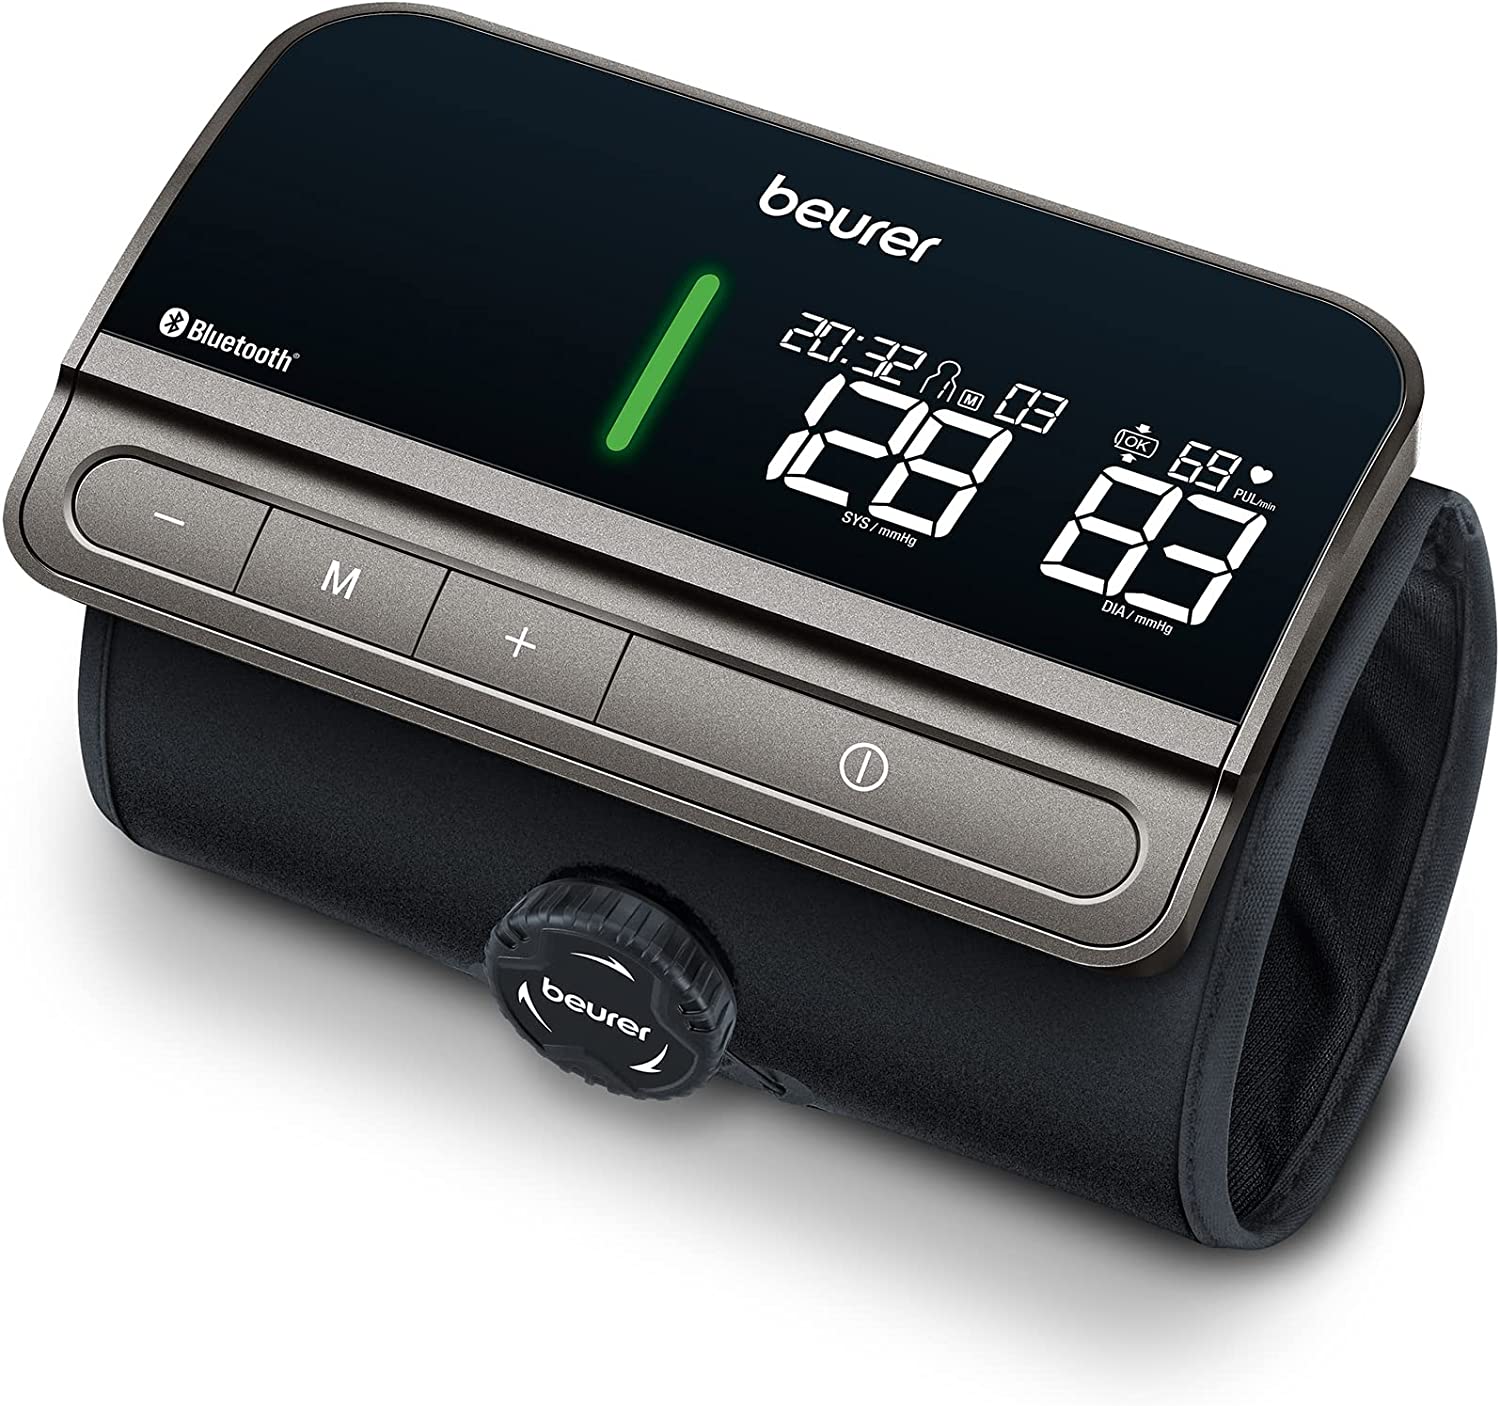 Beurer BM 81 easyLock Upper Arm Blood Pressure Monitor with Innovative Cuff without Hoses or Cables Gentle Pressure Building & Fast Measuring Time Medical Device with App Connection